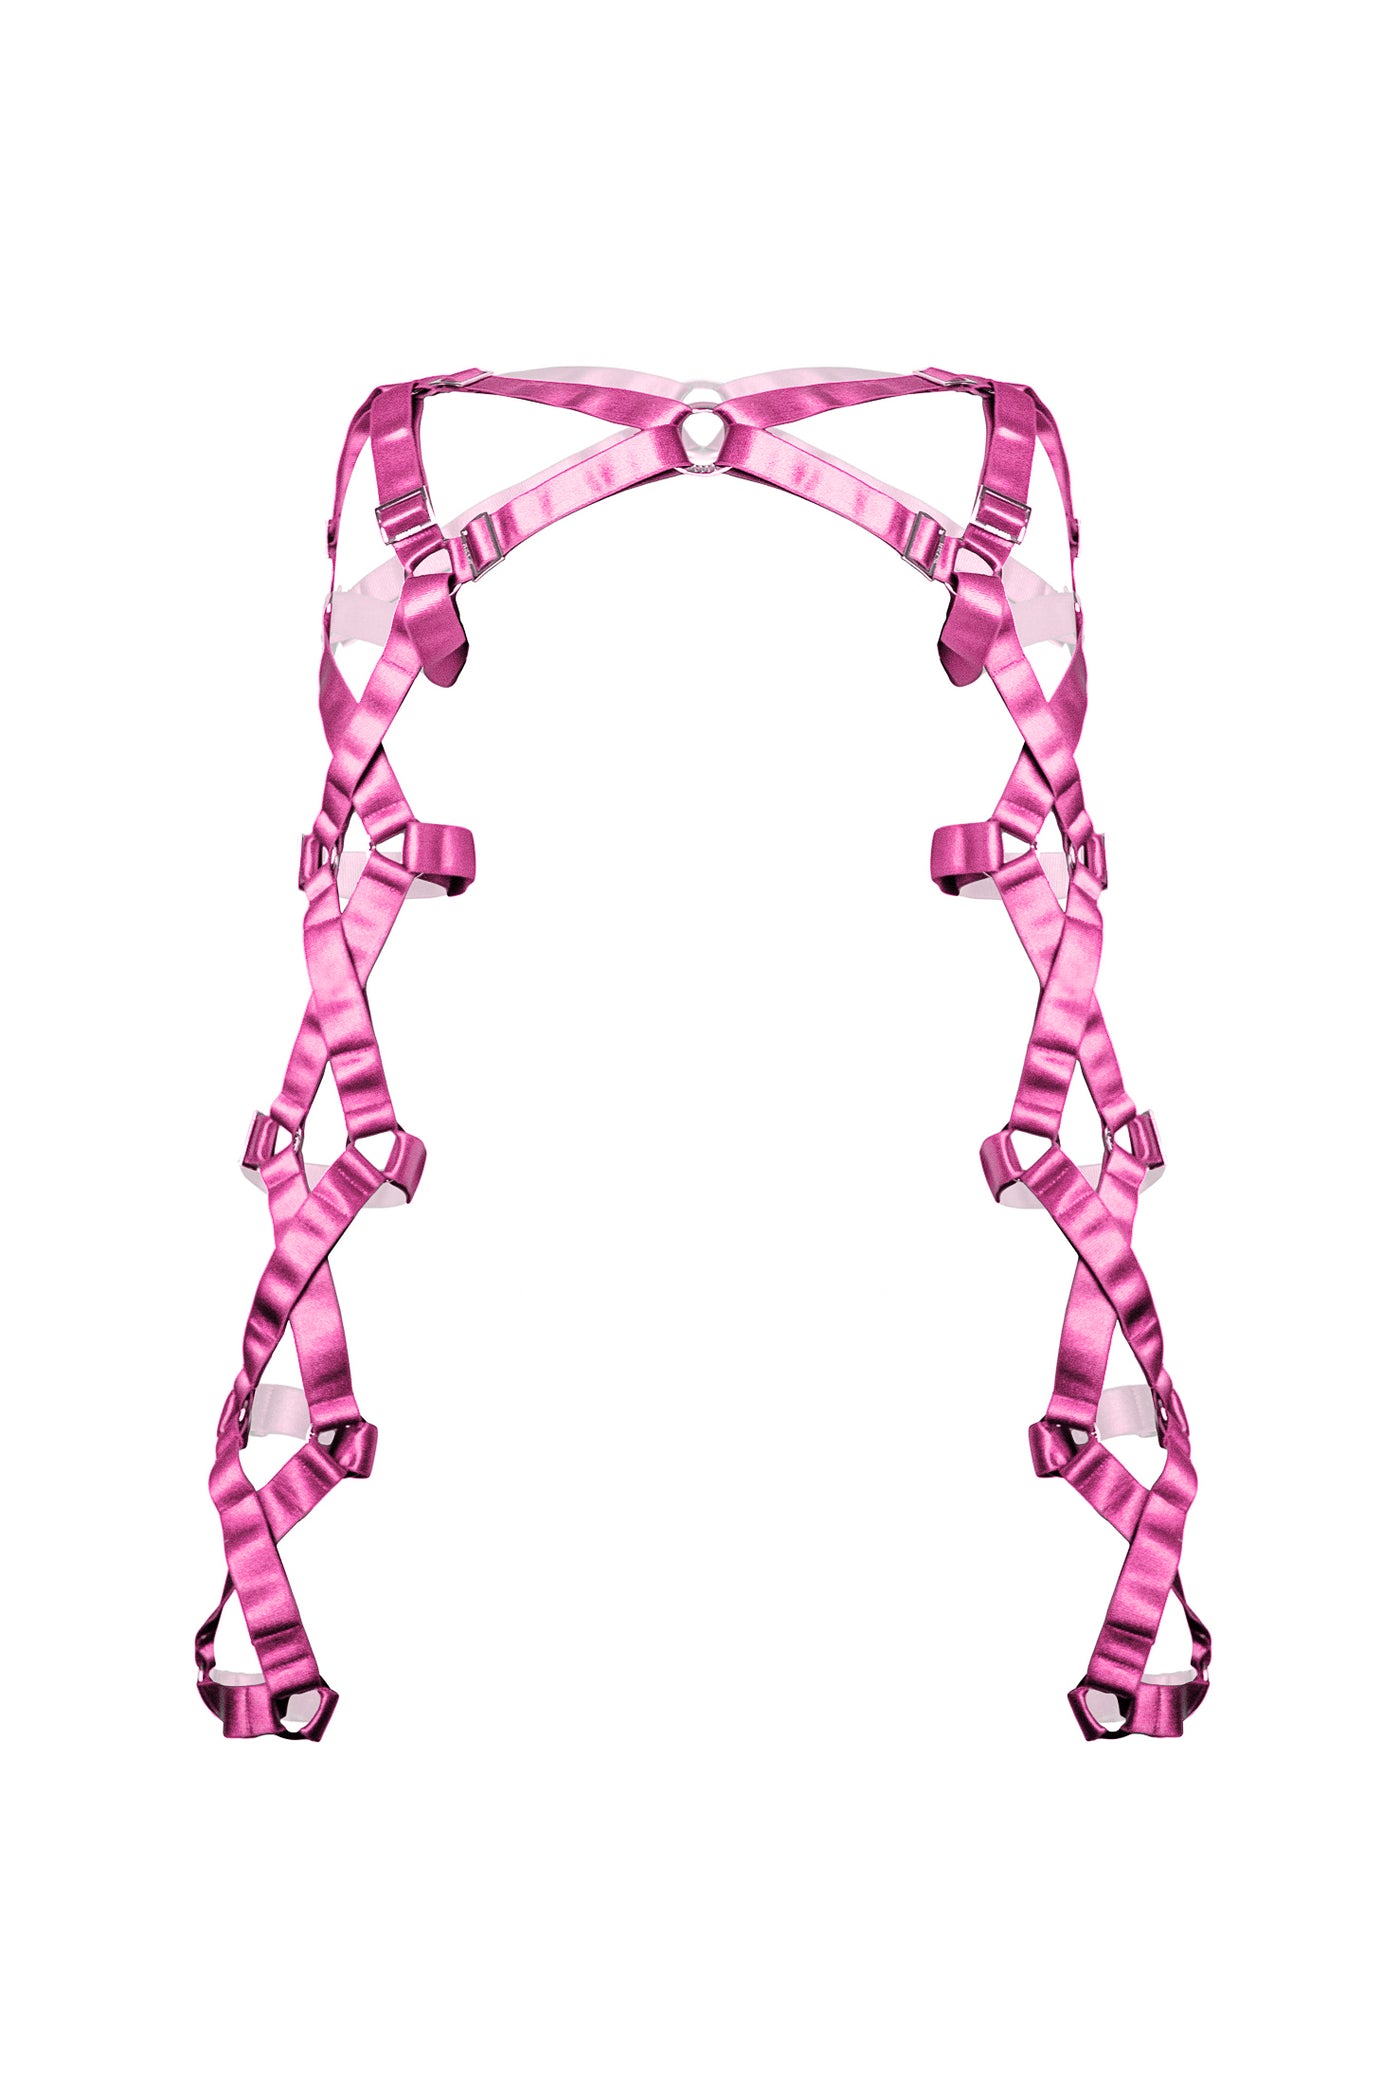 Crucifixion Arm Harness - Candy Pink